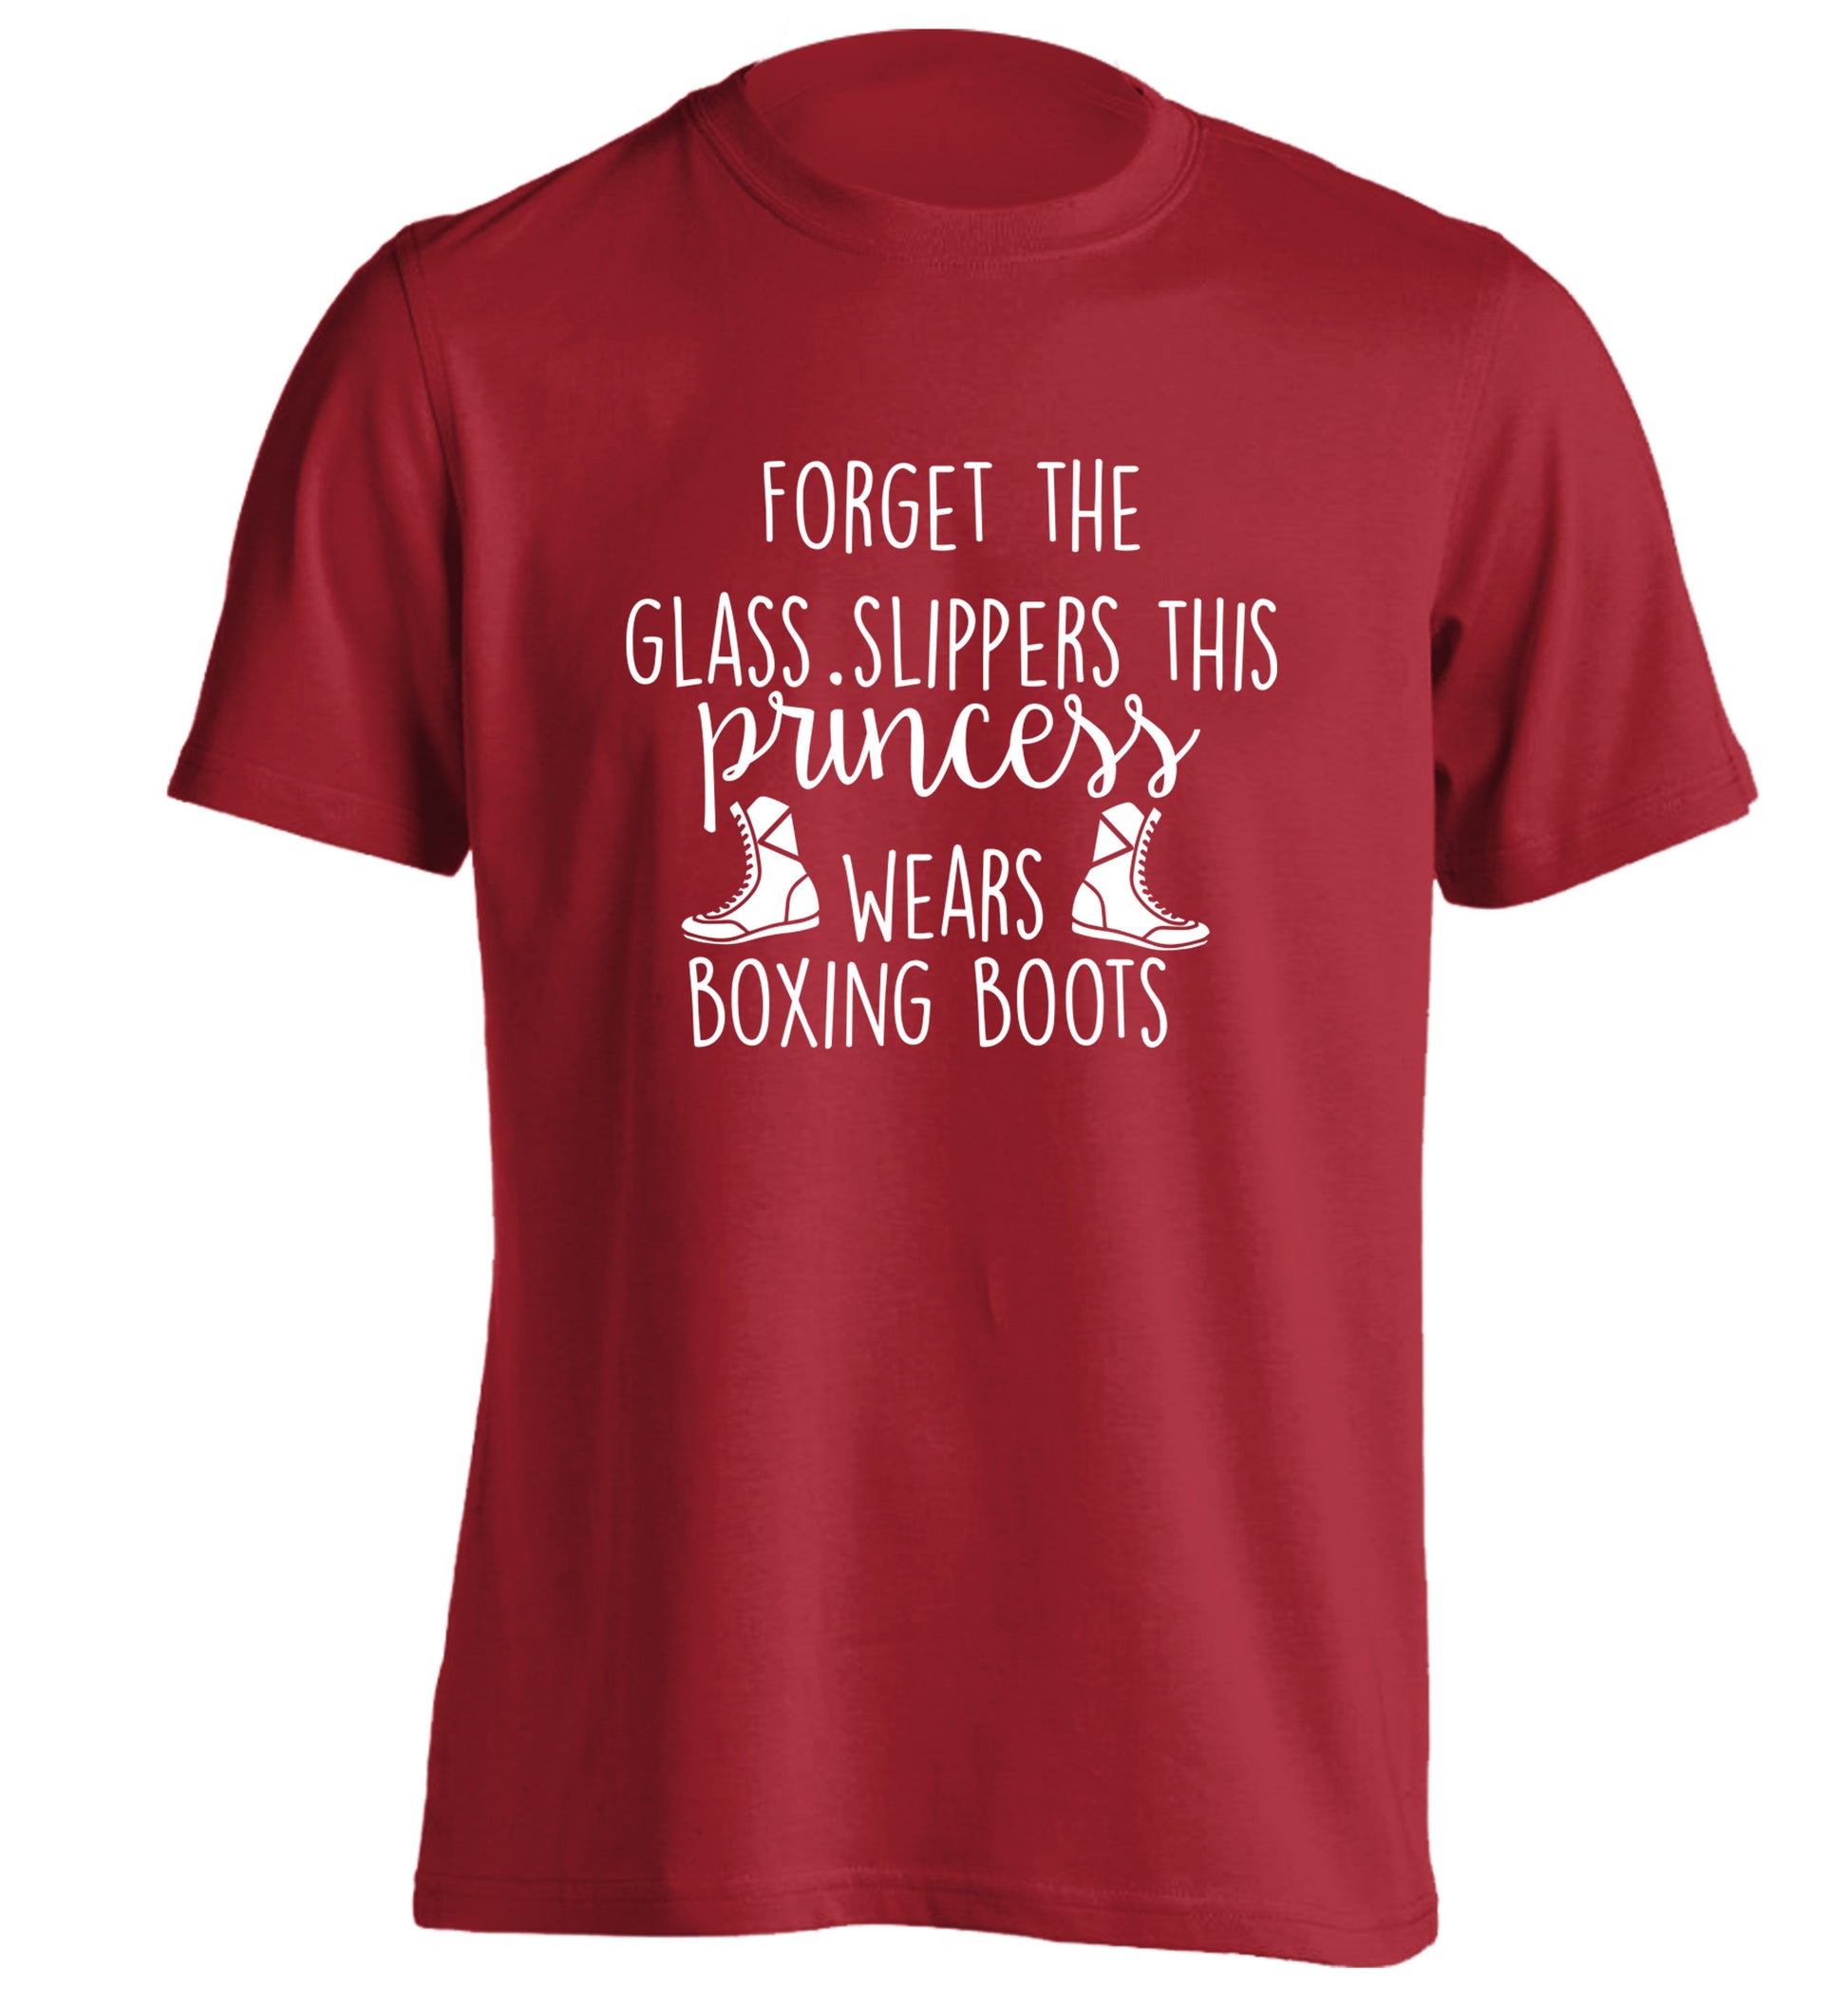 Forget the glass slippers this princess wears boxing boots adults unisex red Tshirt 2XL